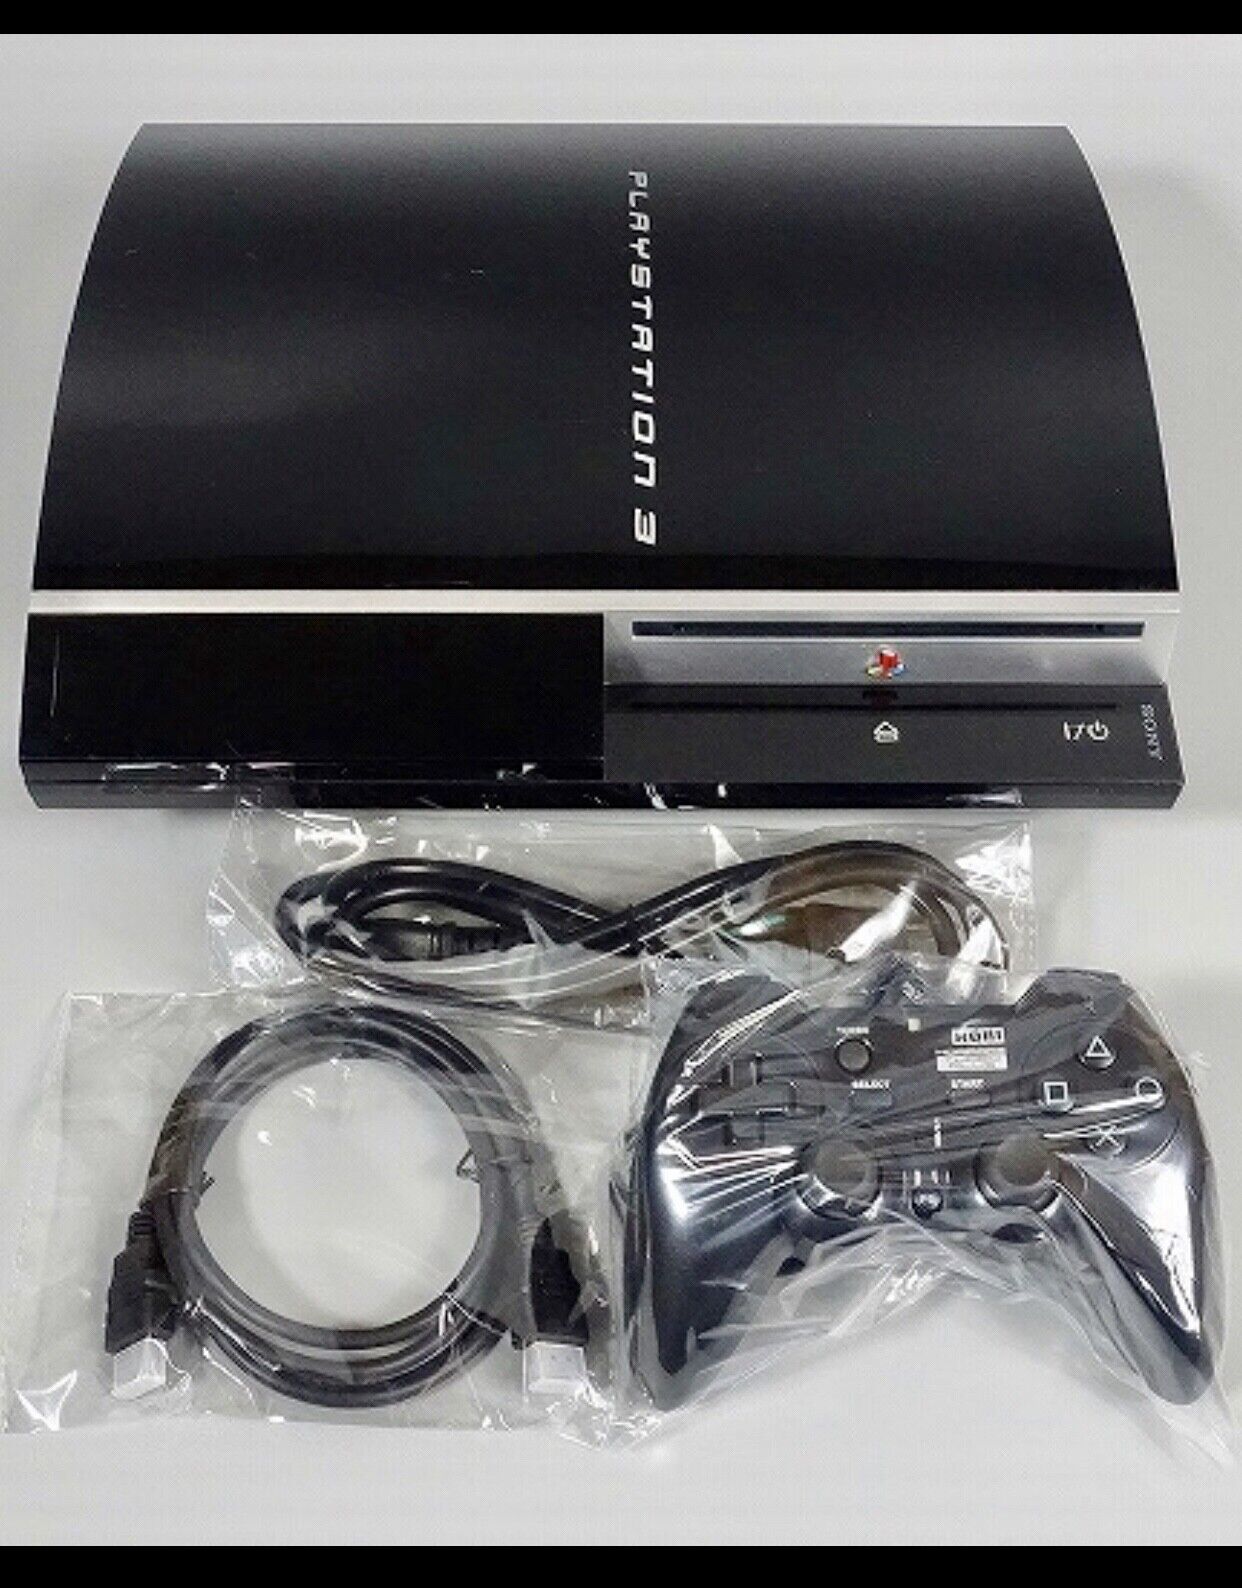 Sony Playstation3 CECHL00 80GB BLACK Console With Set of accessories! From  Japan